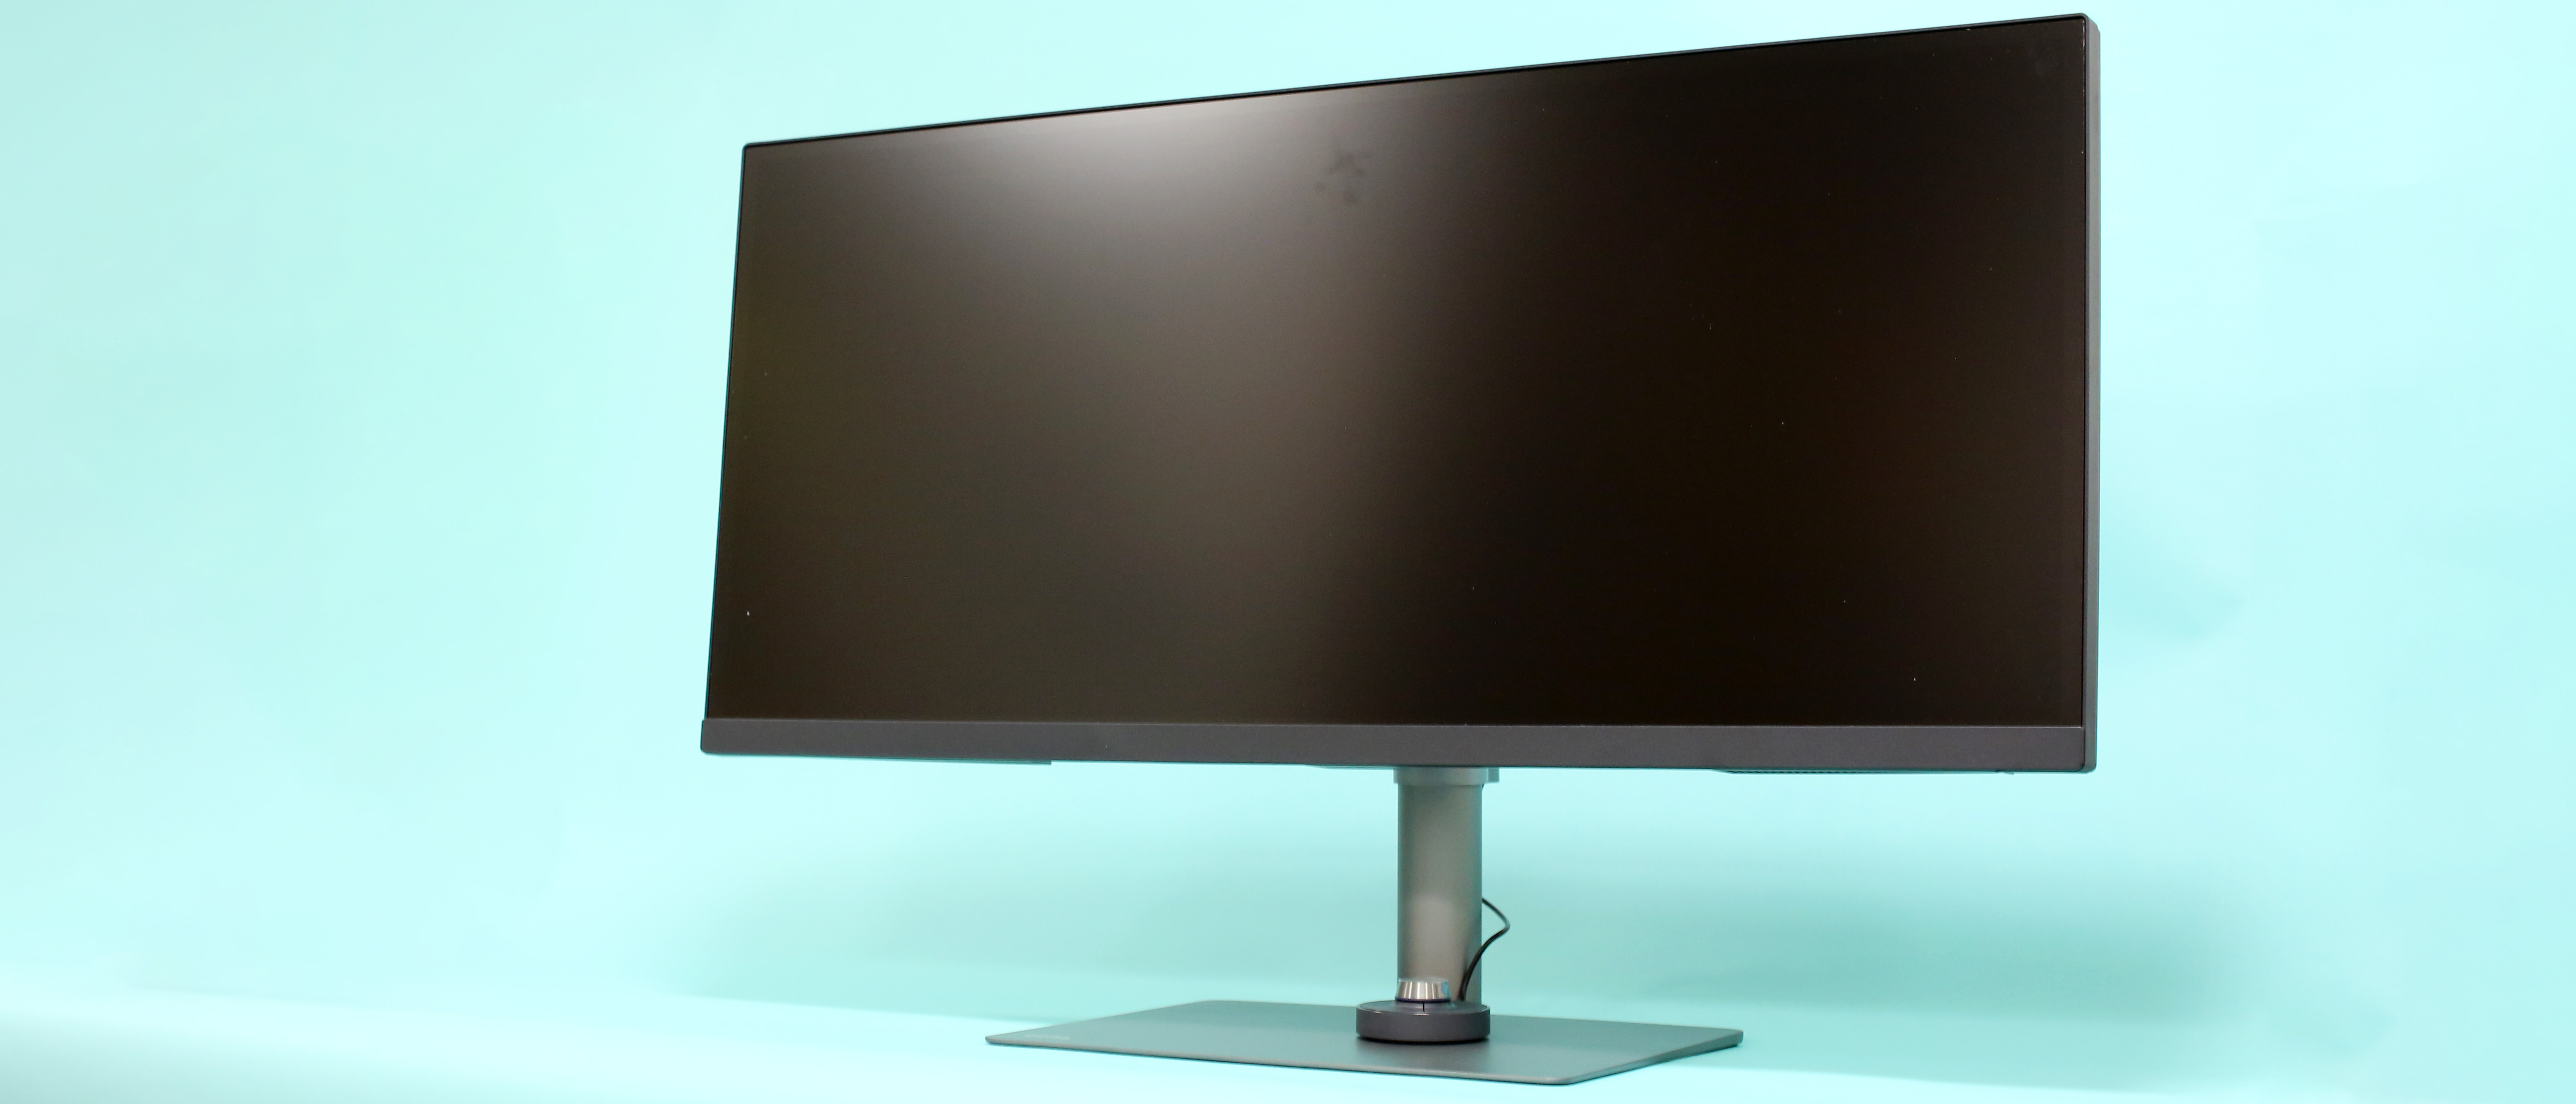 BenQ's PD3420Q Delivers Great Value and Performance